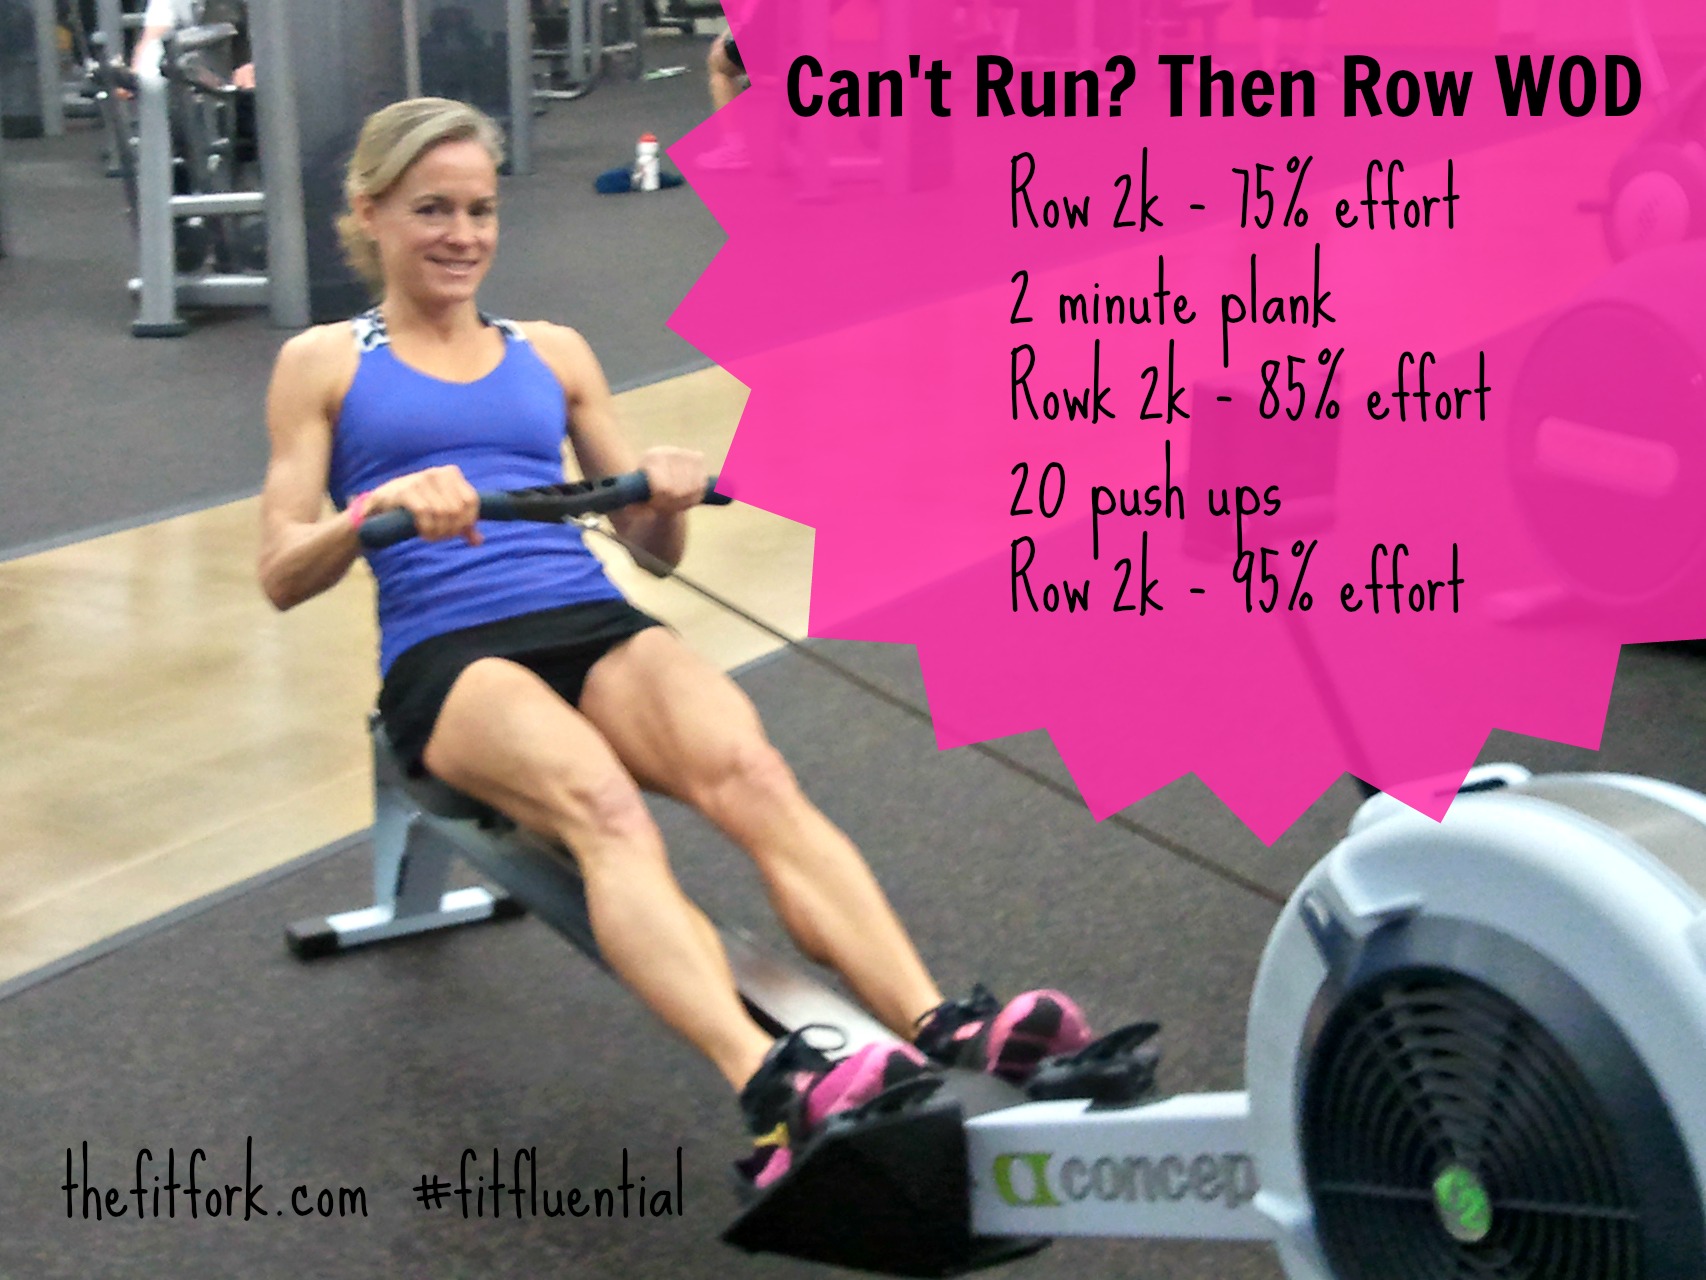 Brutal CrossFit Rowing Workouts to Build Mental Toughness and Conditioning